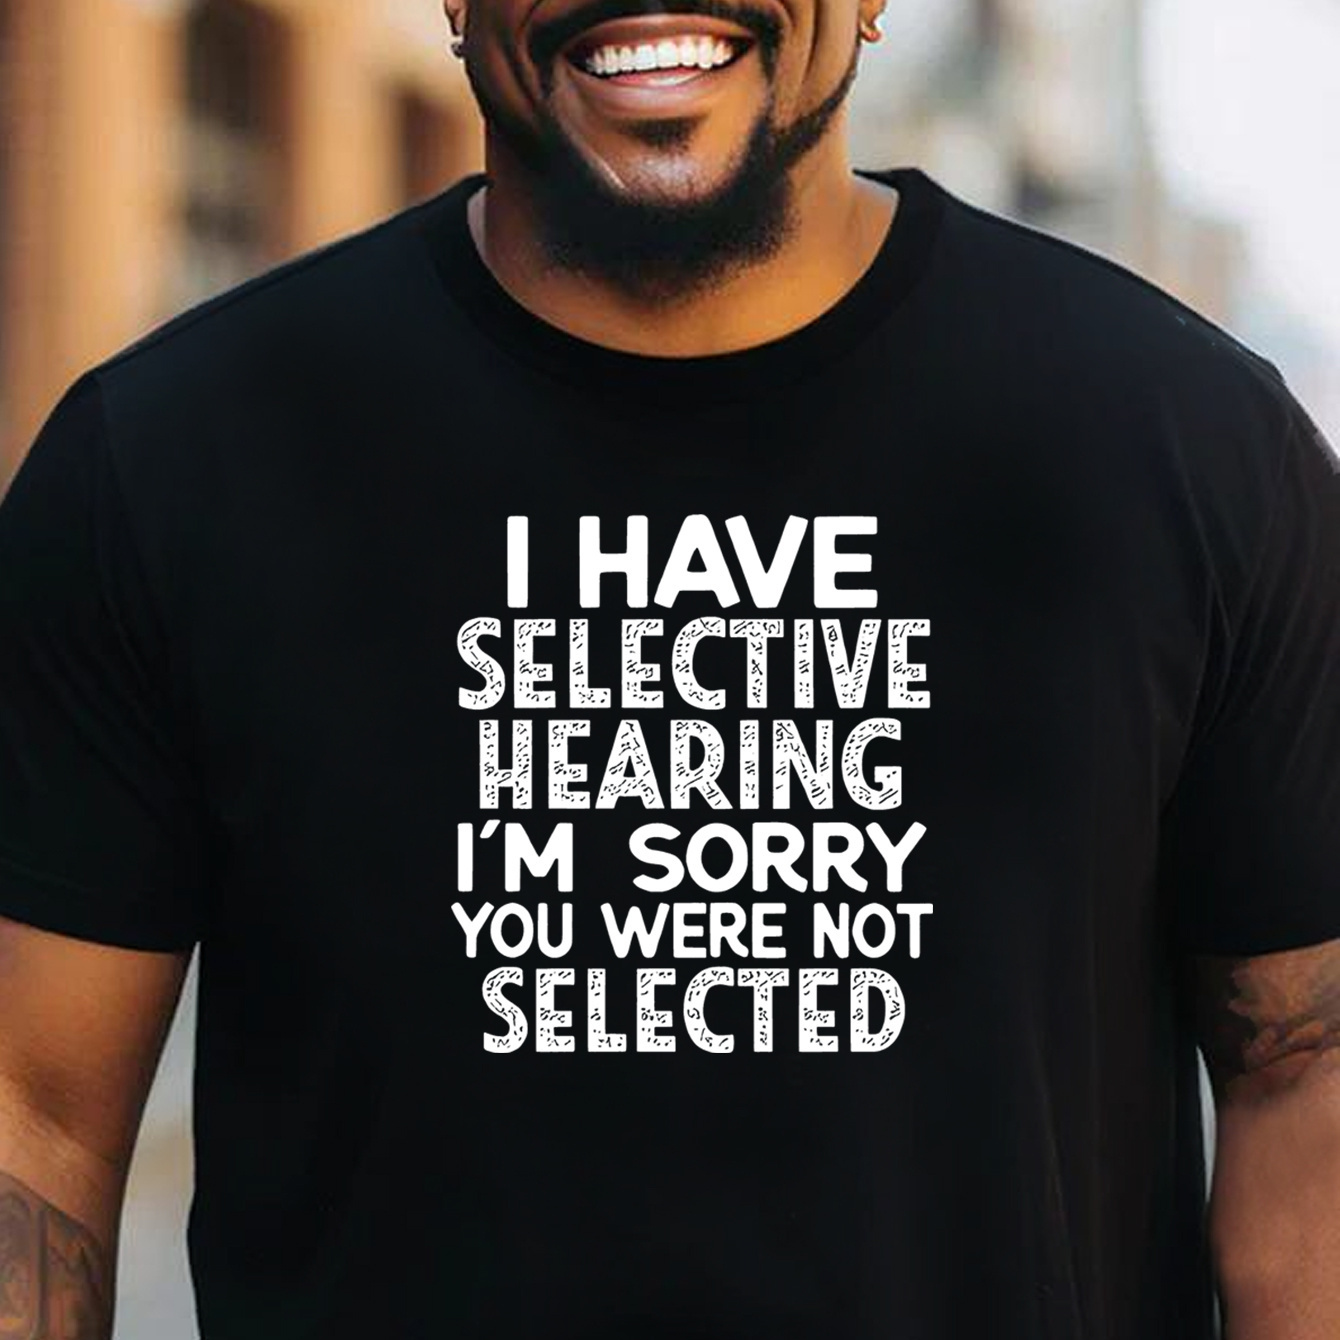 

1 Pc, 100% Cotton T-shirt, Plus Size Men's T-shirt, "i Have Selective Hearing" Graphic Print Tees For Summer, Trendy Casual Short Sleeve Tops For Males